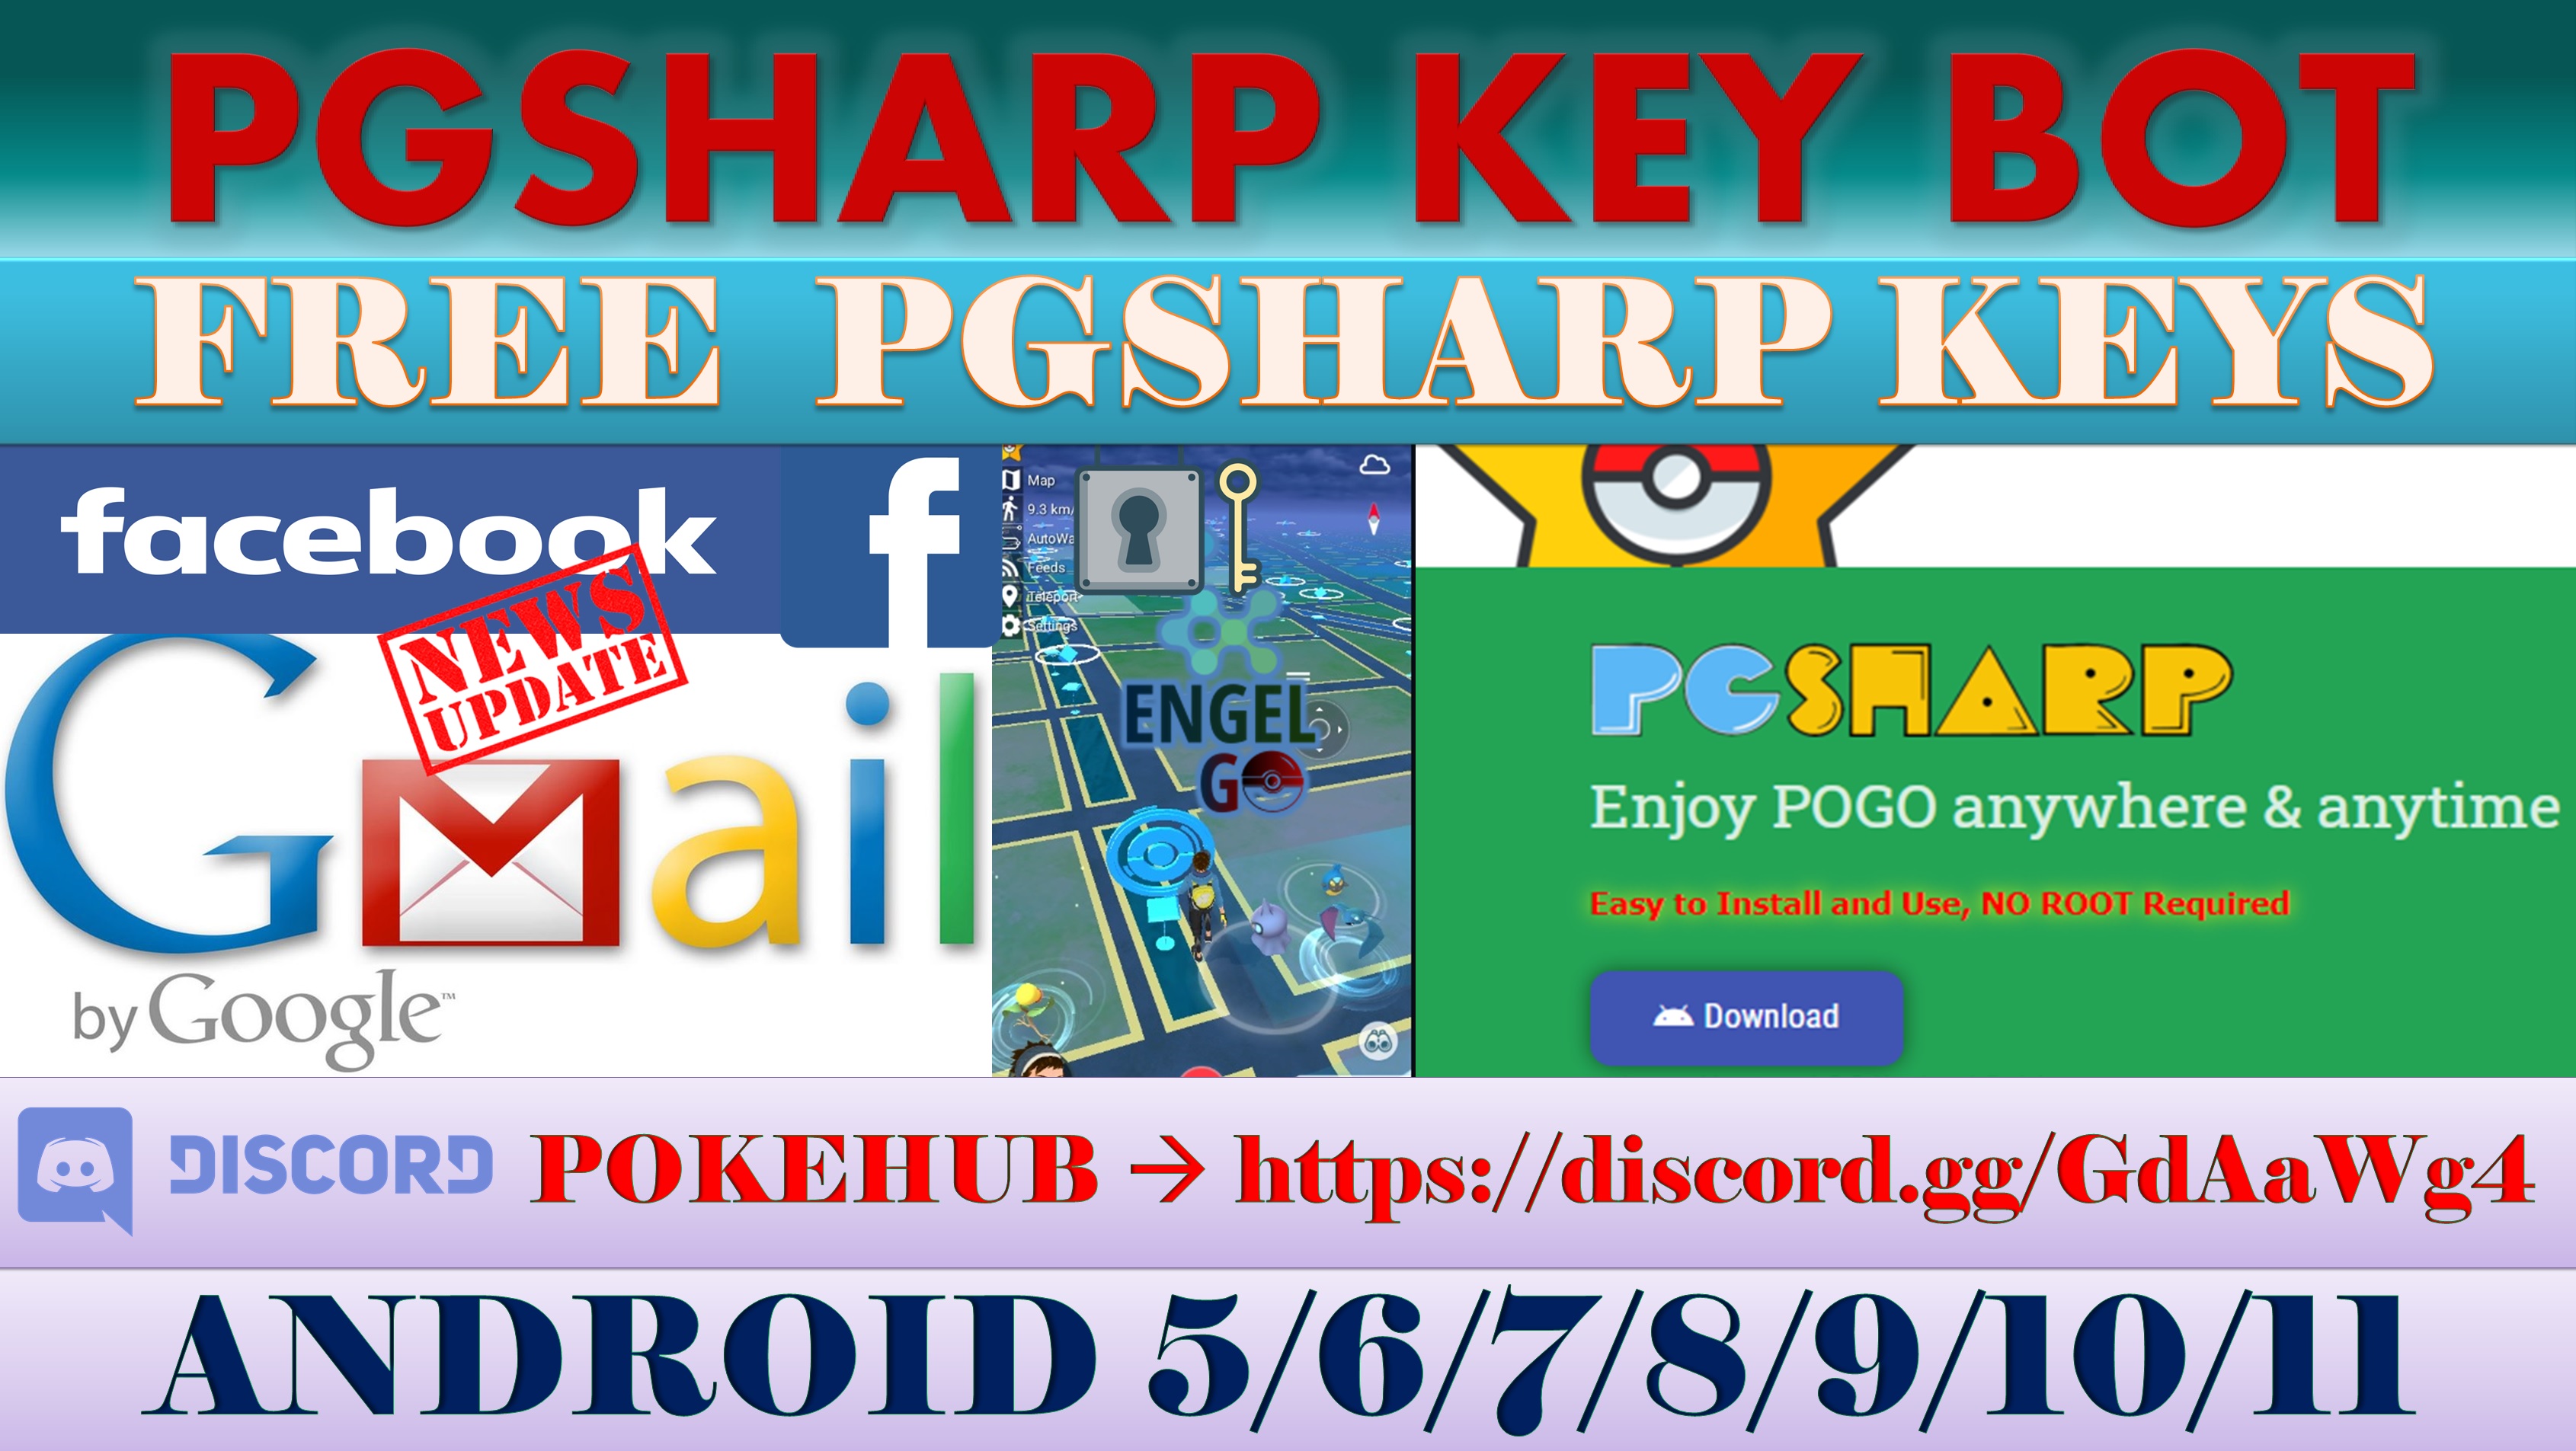 How to login with Google in Pgsharp